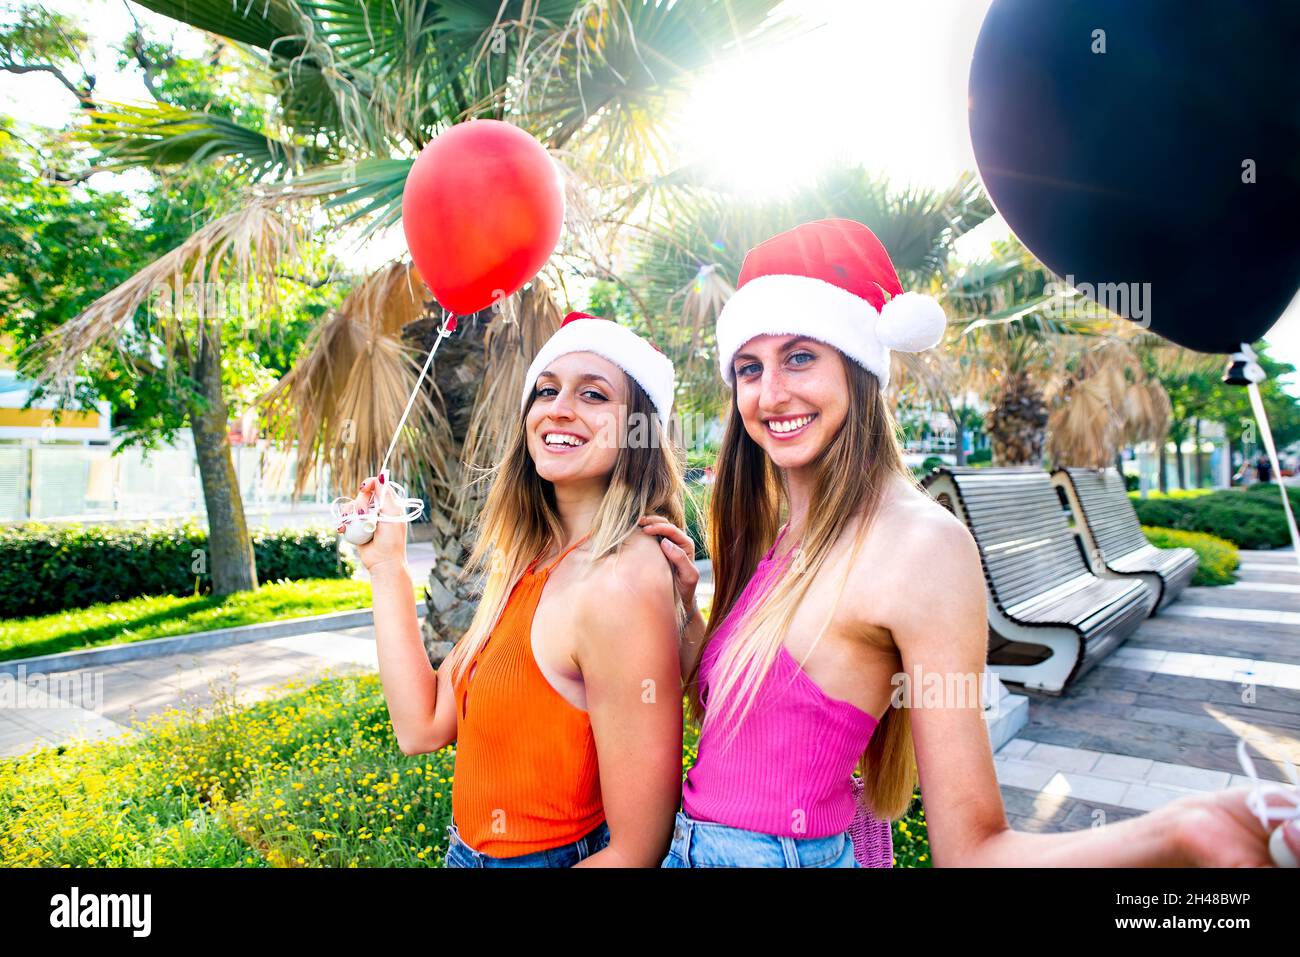 merry christmas! Young adult sisters celebrating xmas wearing a santa claus hat and holding balloons outdoor on winter warm holidays. happy females Stock Photo